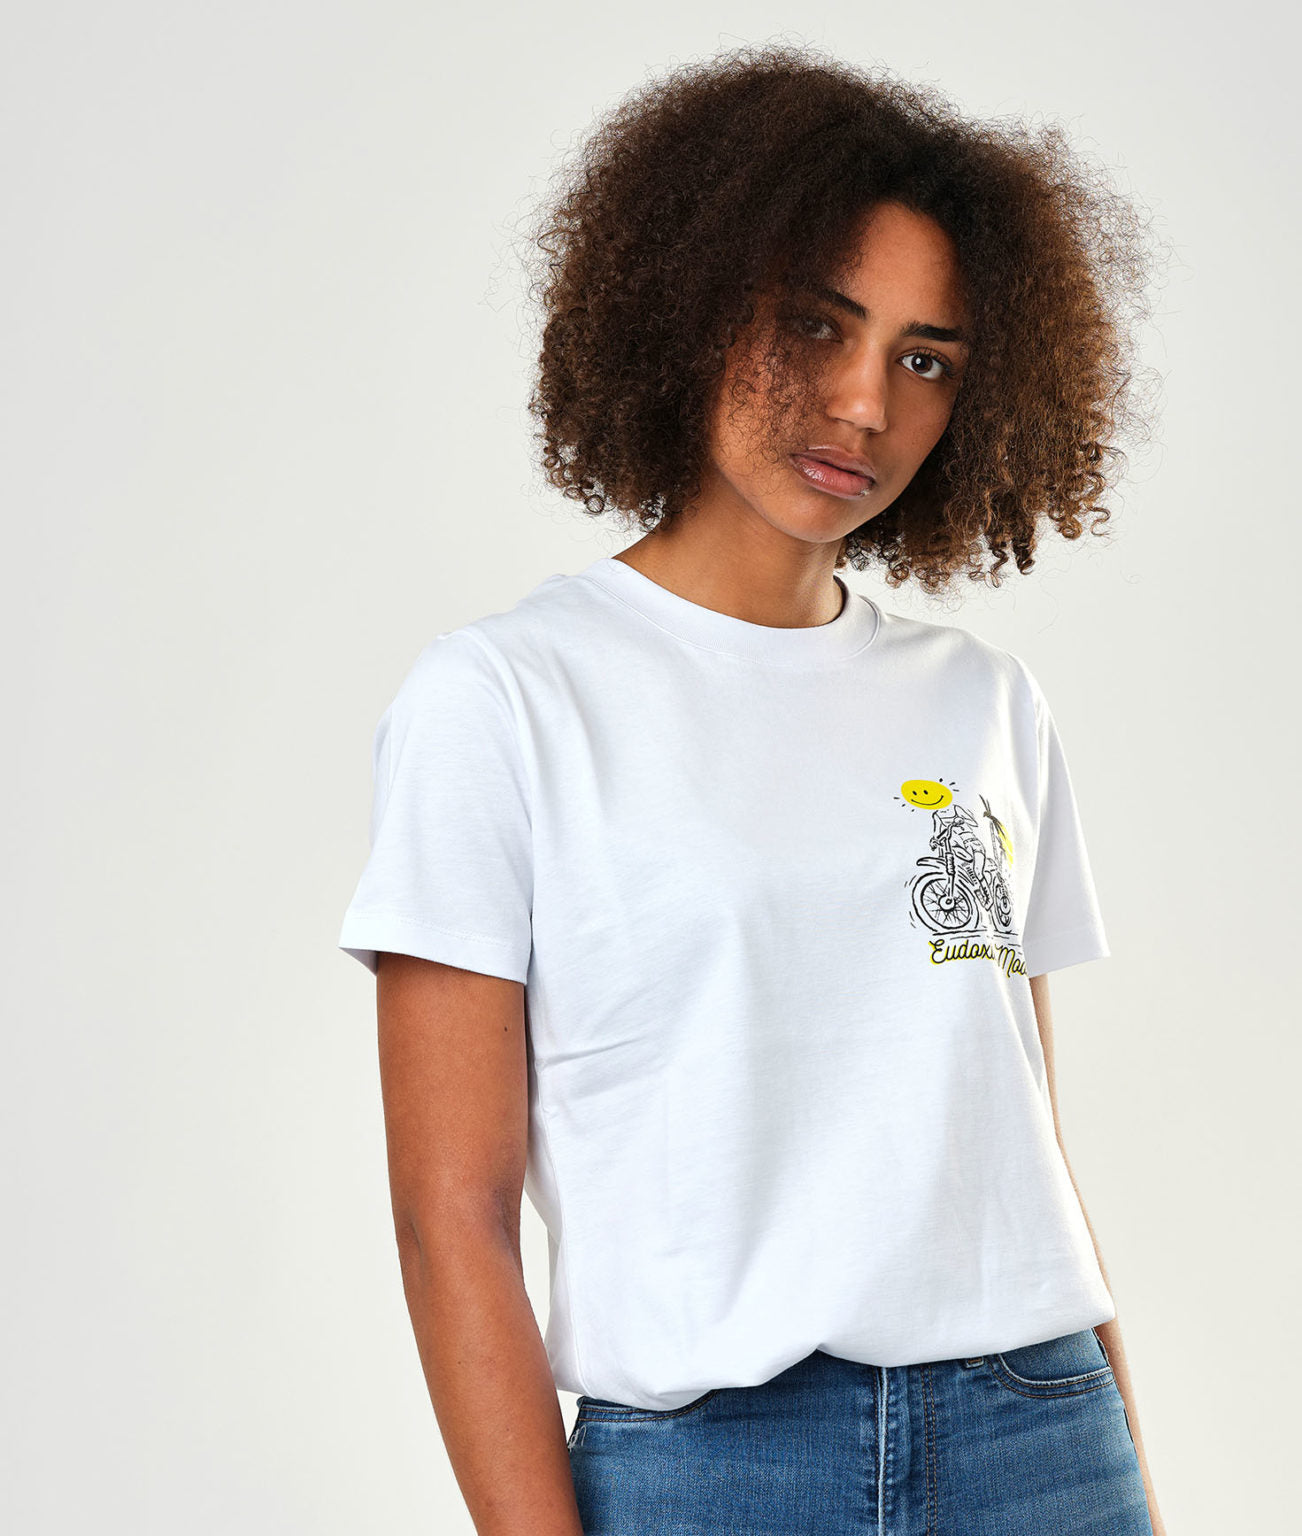 Eudoxie Laurie Tee